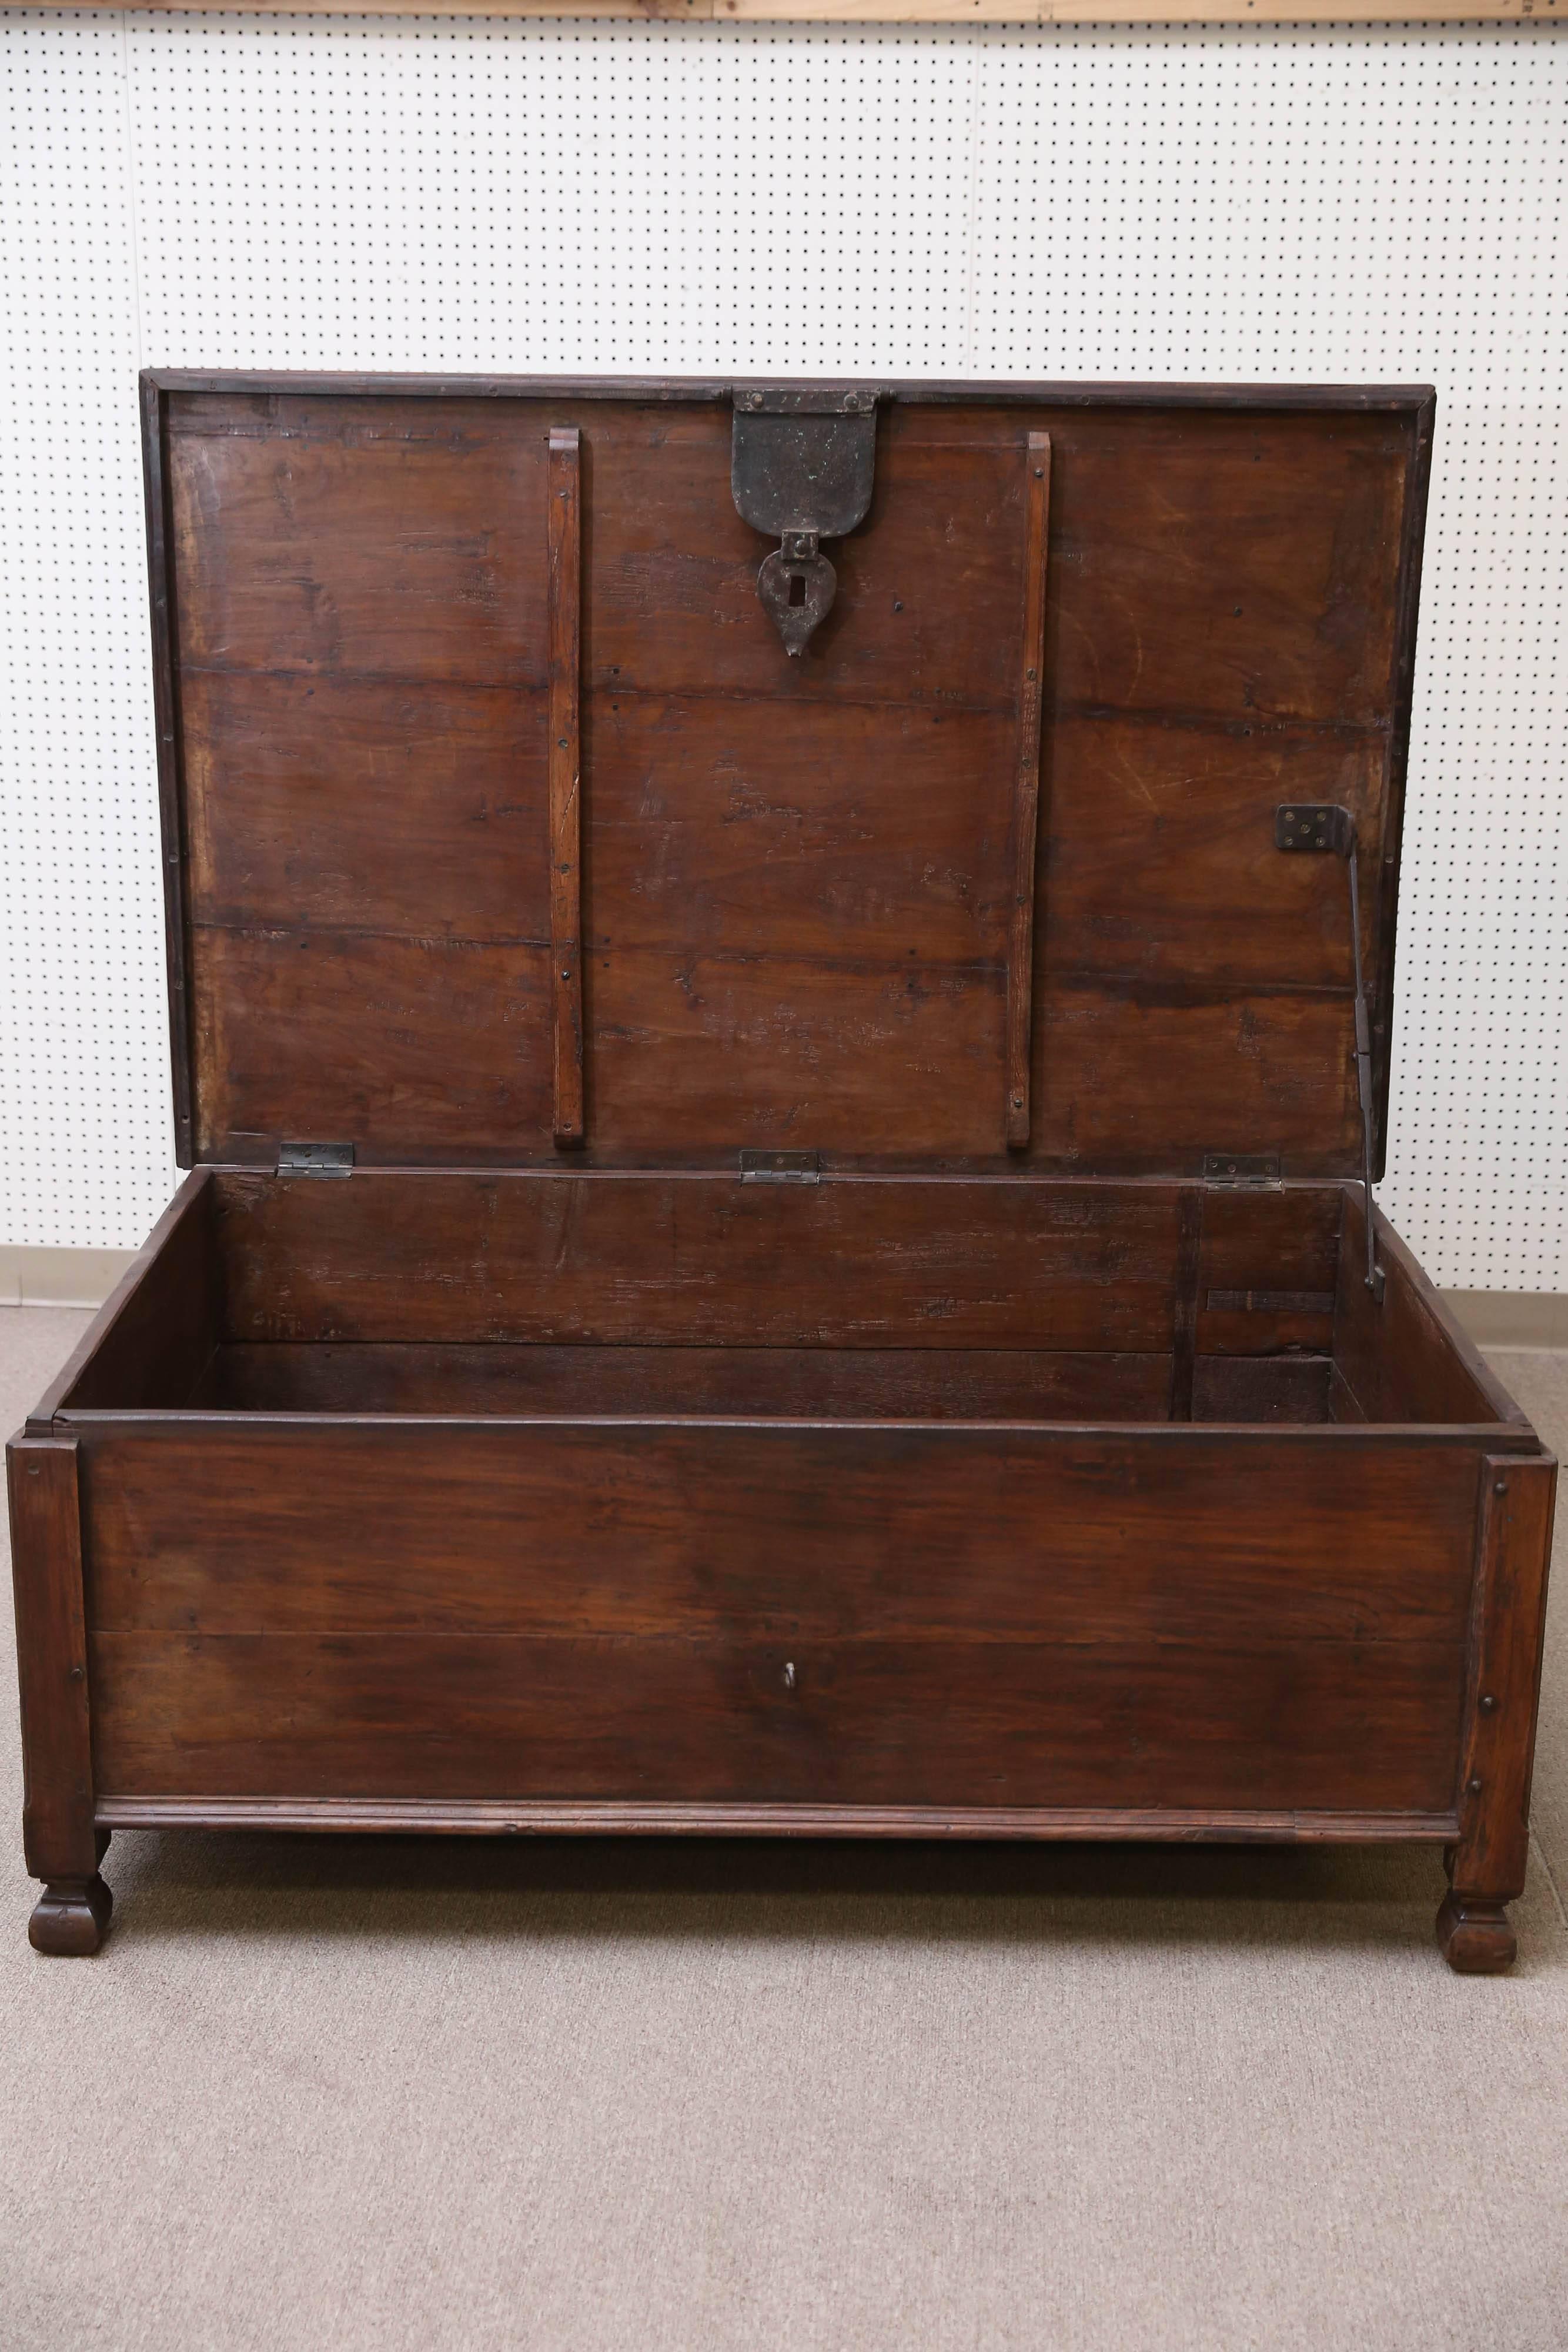 Large Teak Wood Early 19th Century Dowry Chest on Four Wooden Wheels For Sale 4